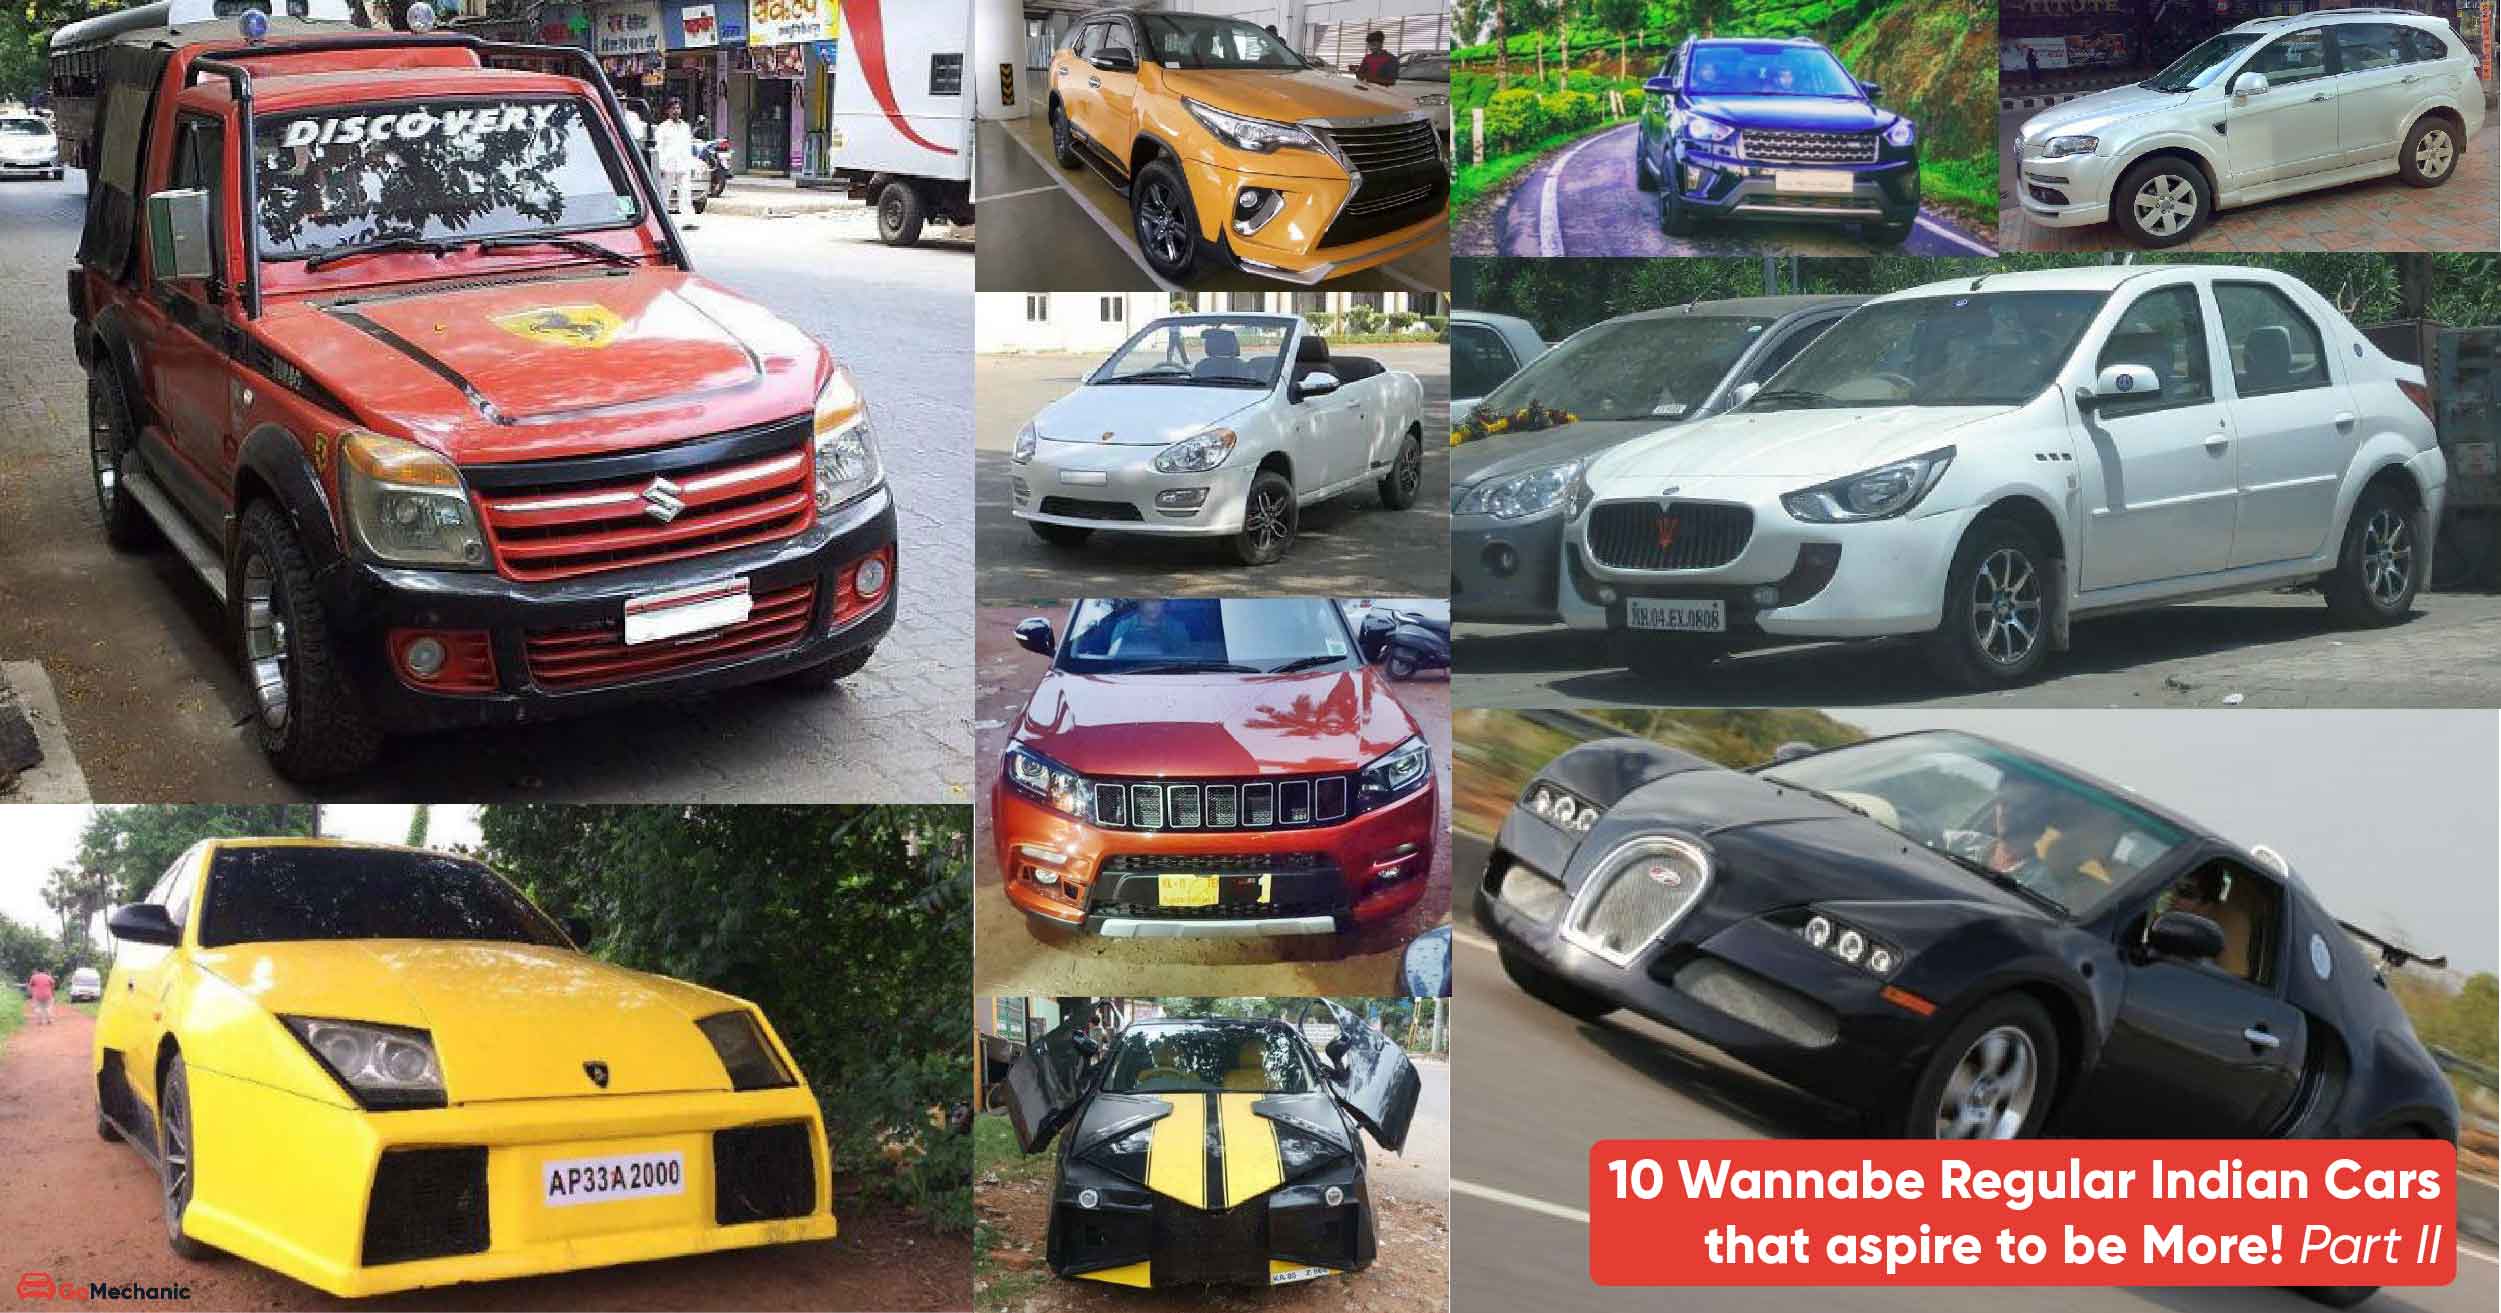 10 wannabe regular Indian cars that aspire to be more part 2